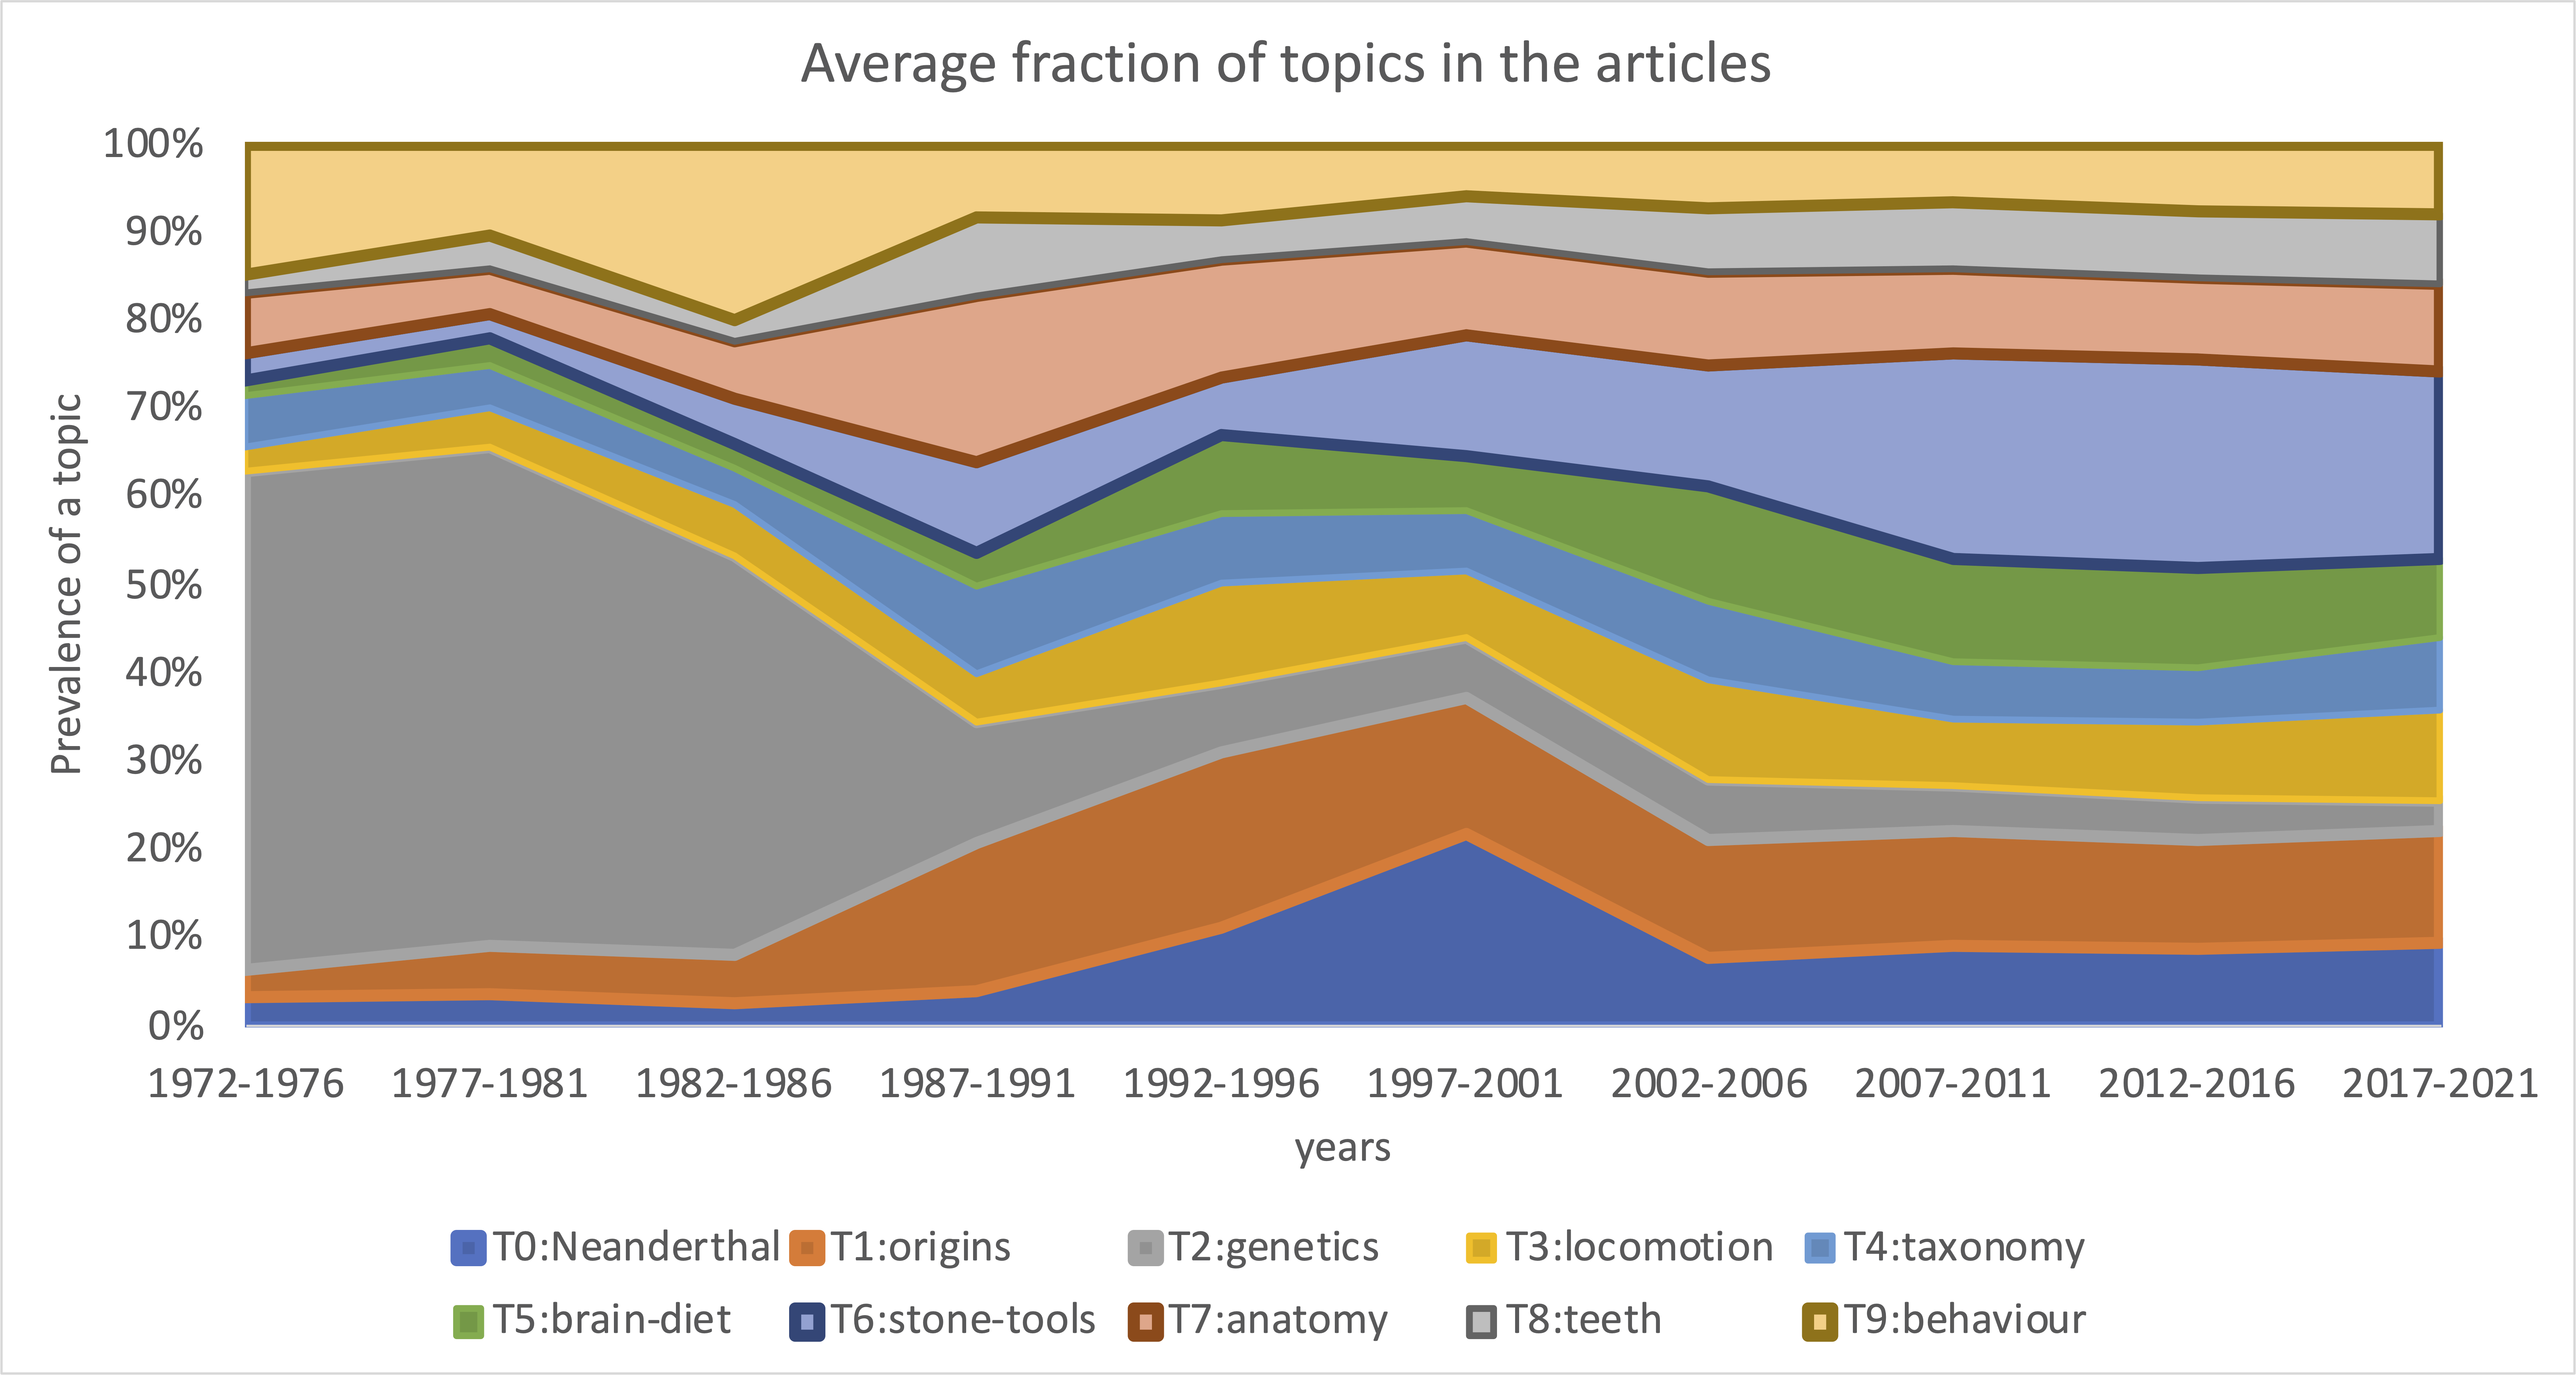 Prevalence of topics over the years